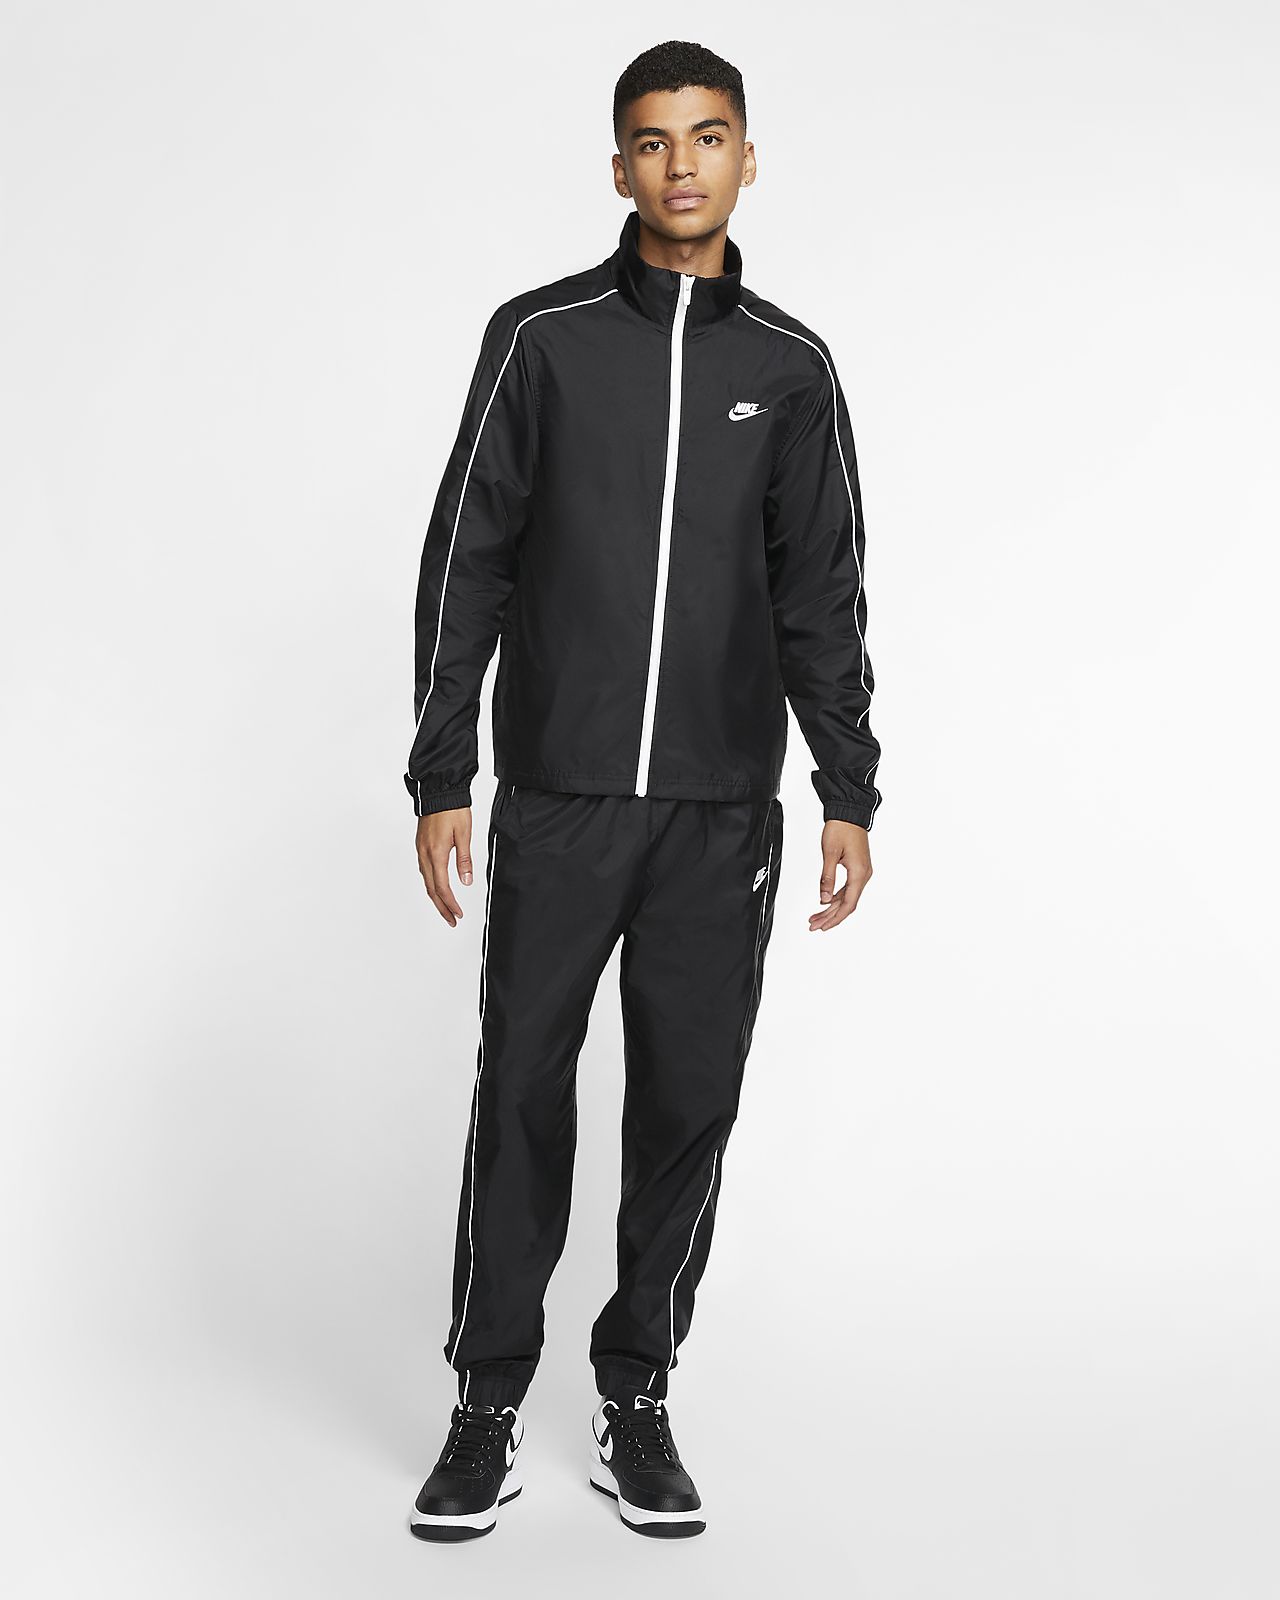 nike plus tracksuit reduced b757a 37bbb